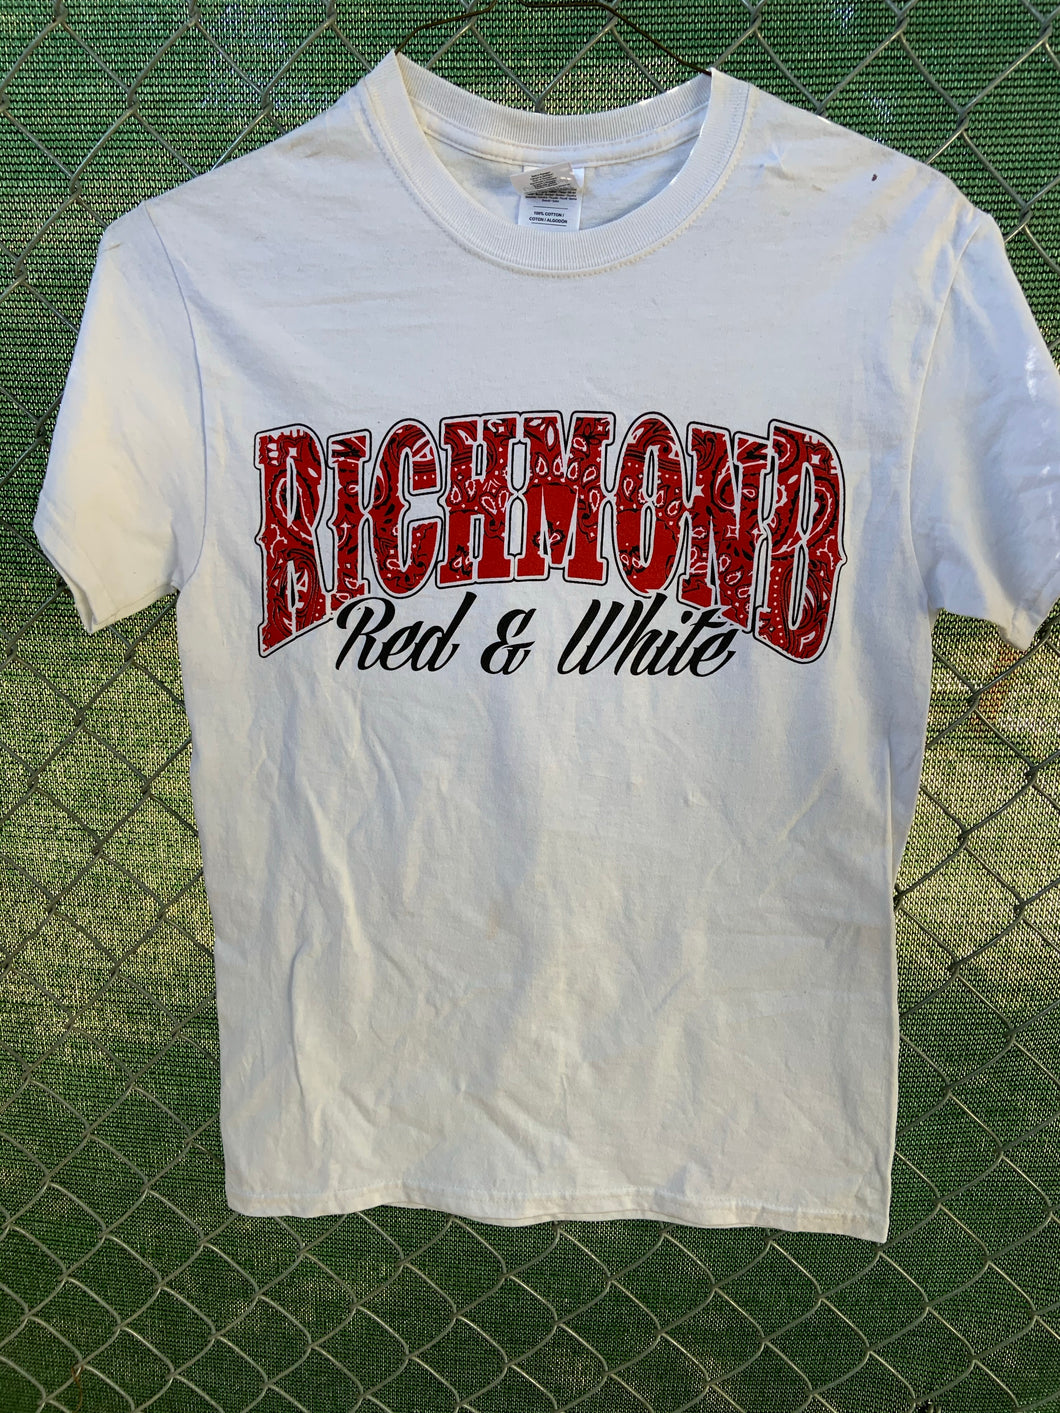 White t shirt with richmond in red bandana